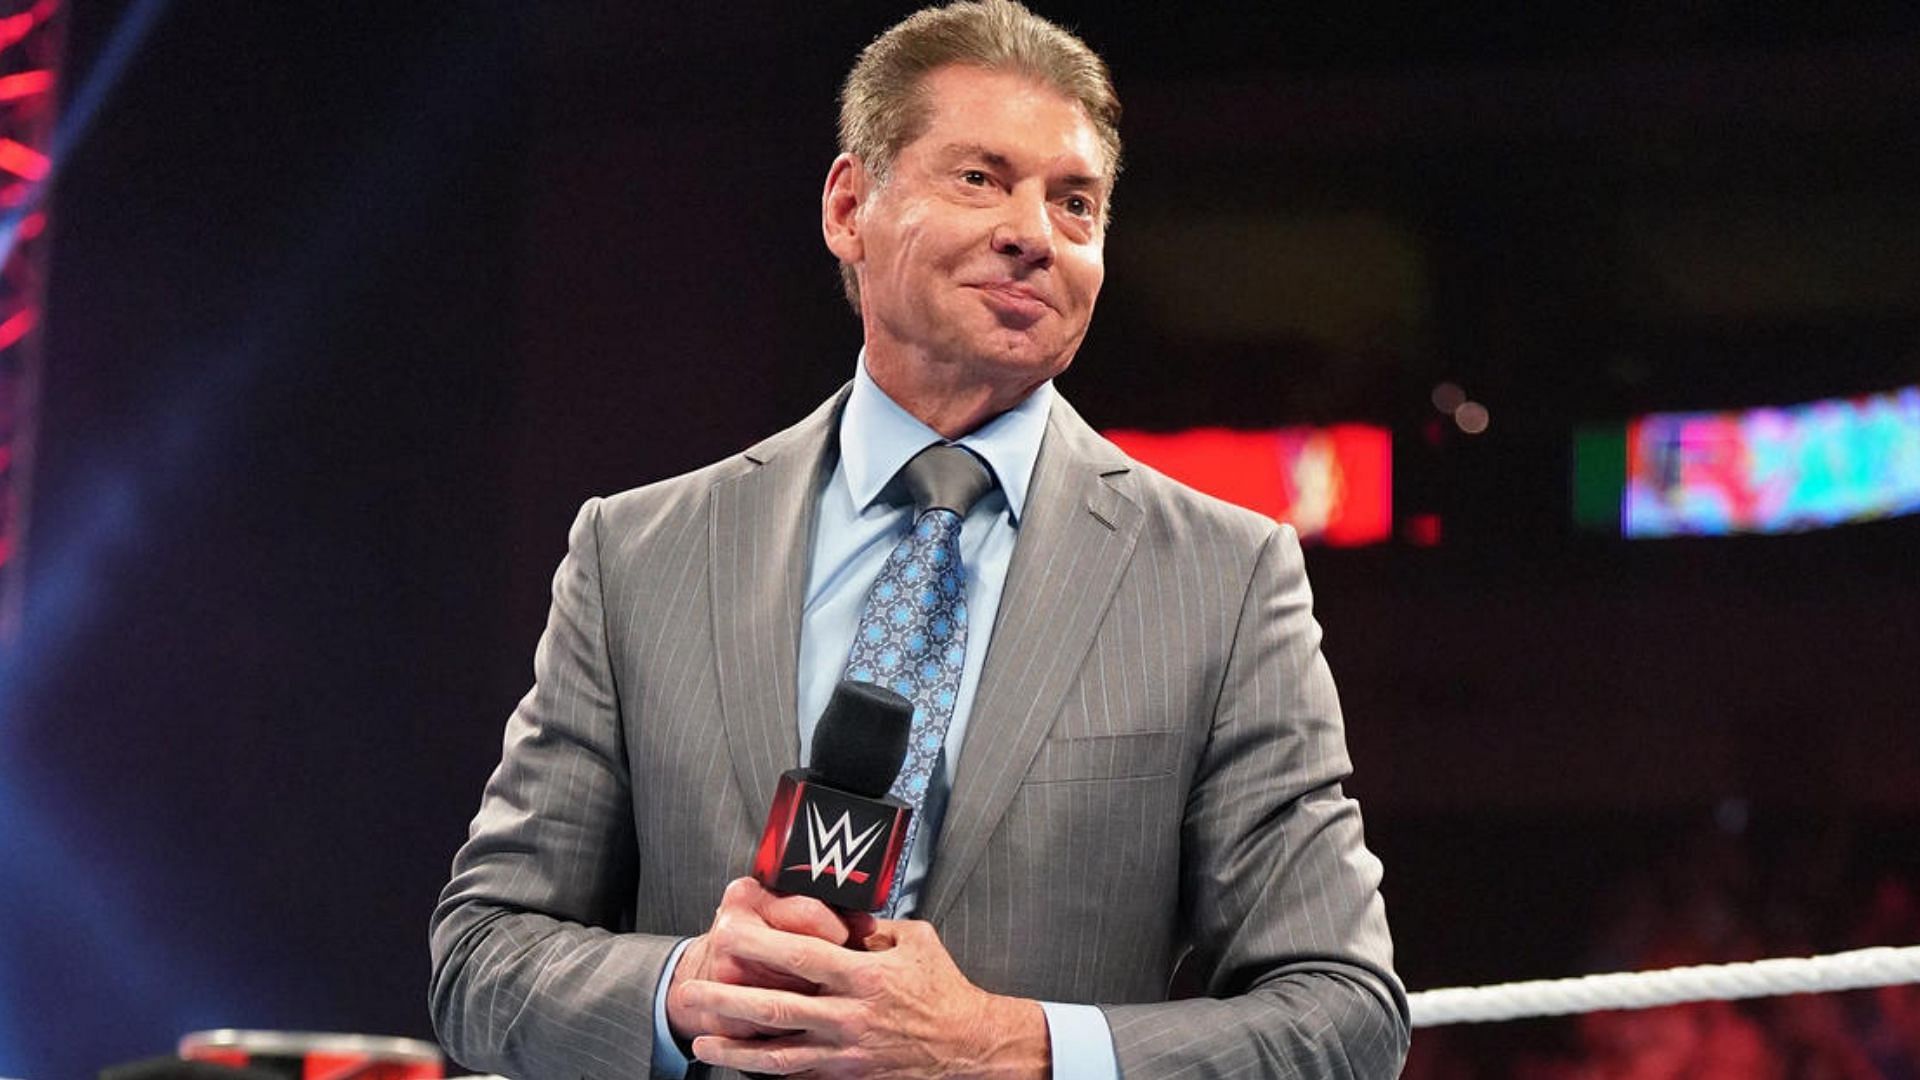 Vince McMahon appeared on the June 20th edition of WWE RAW